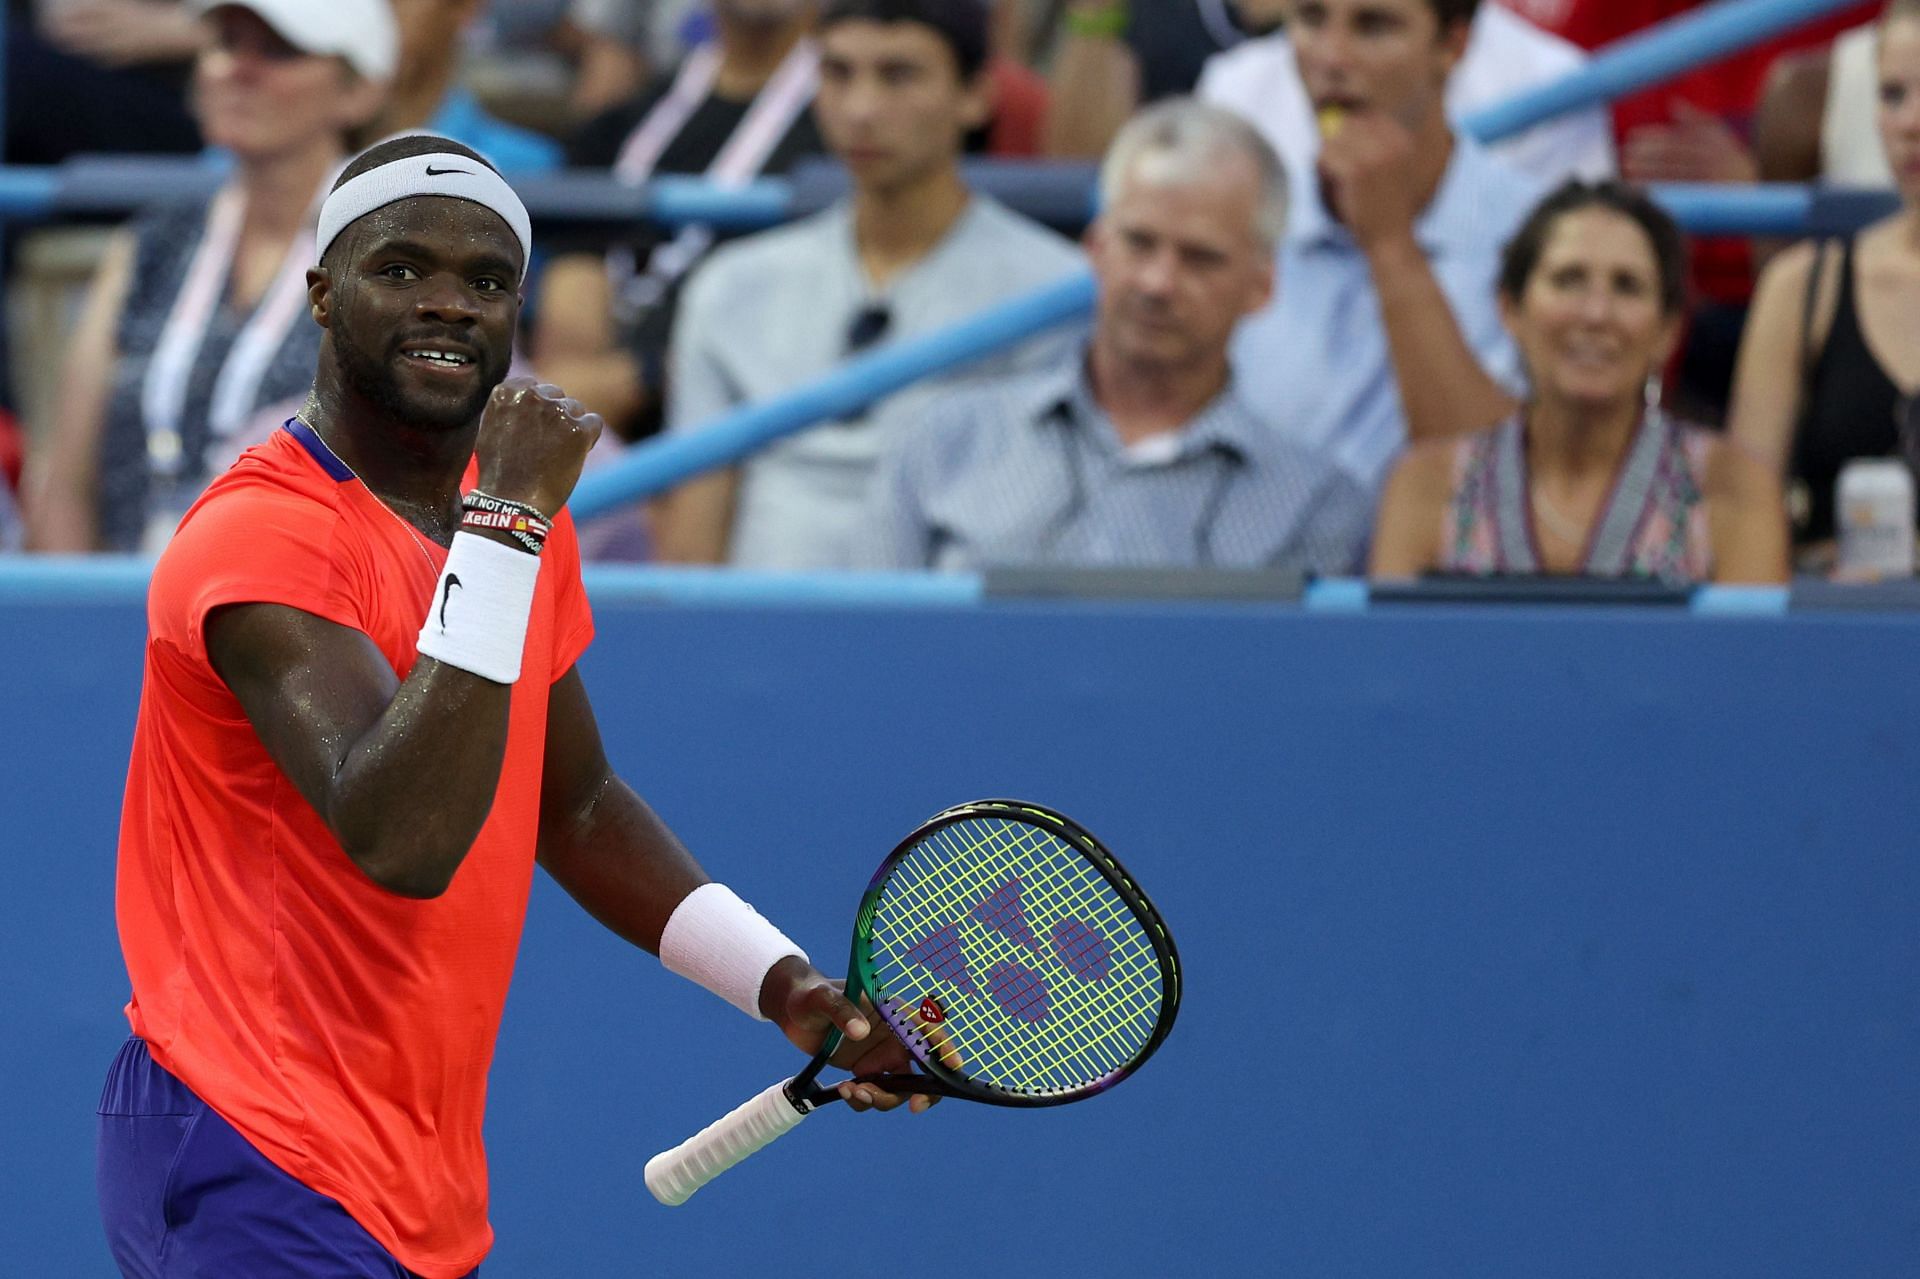 Frances Tiafoe at the Citi Open - Day 5